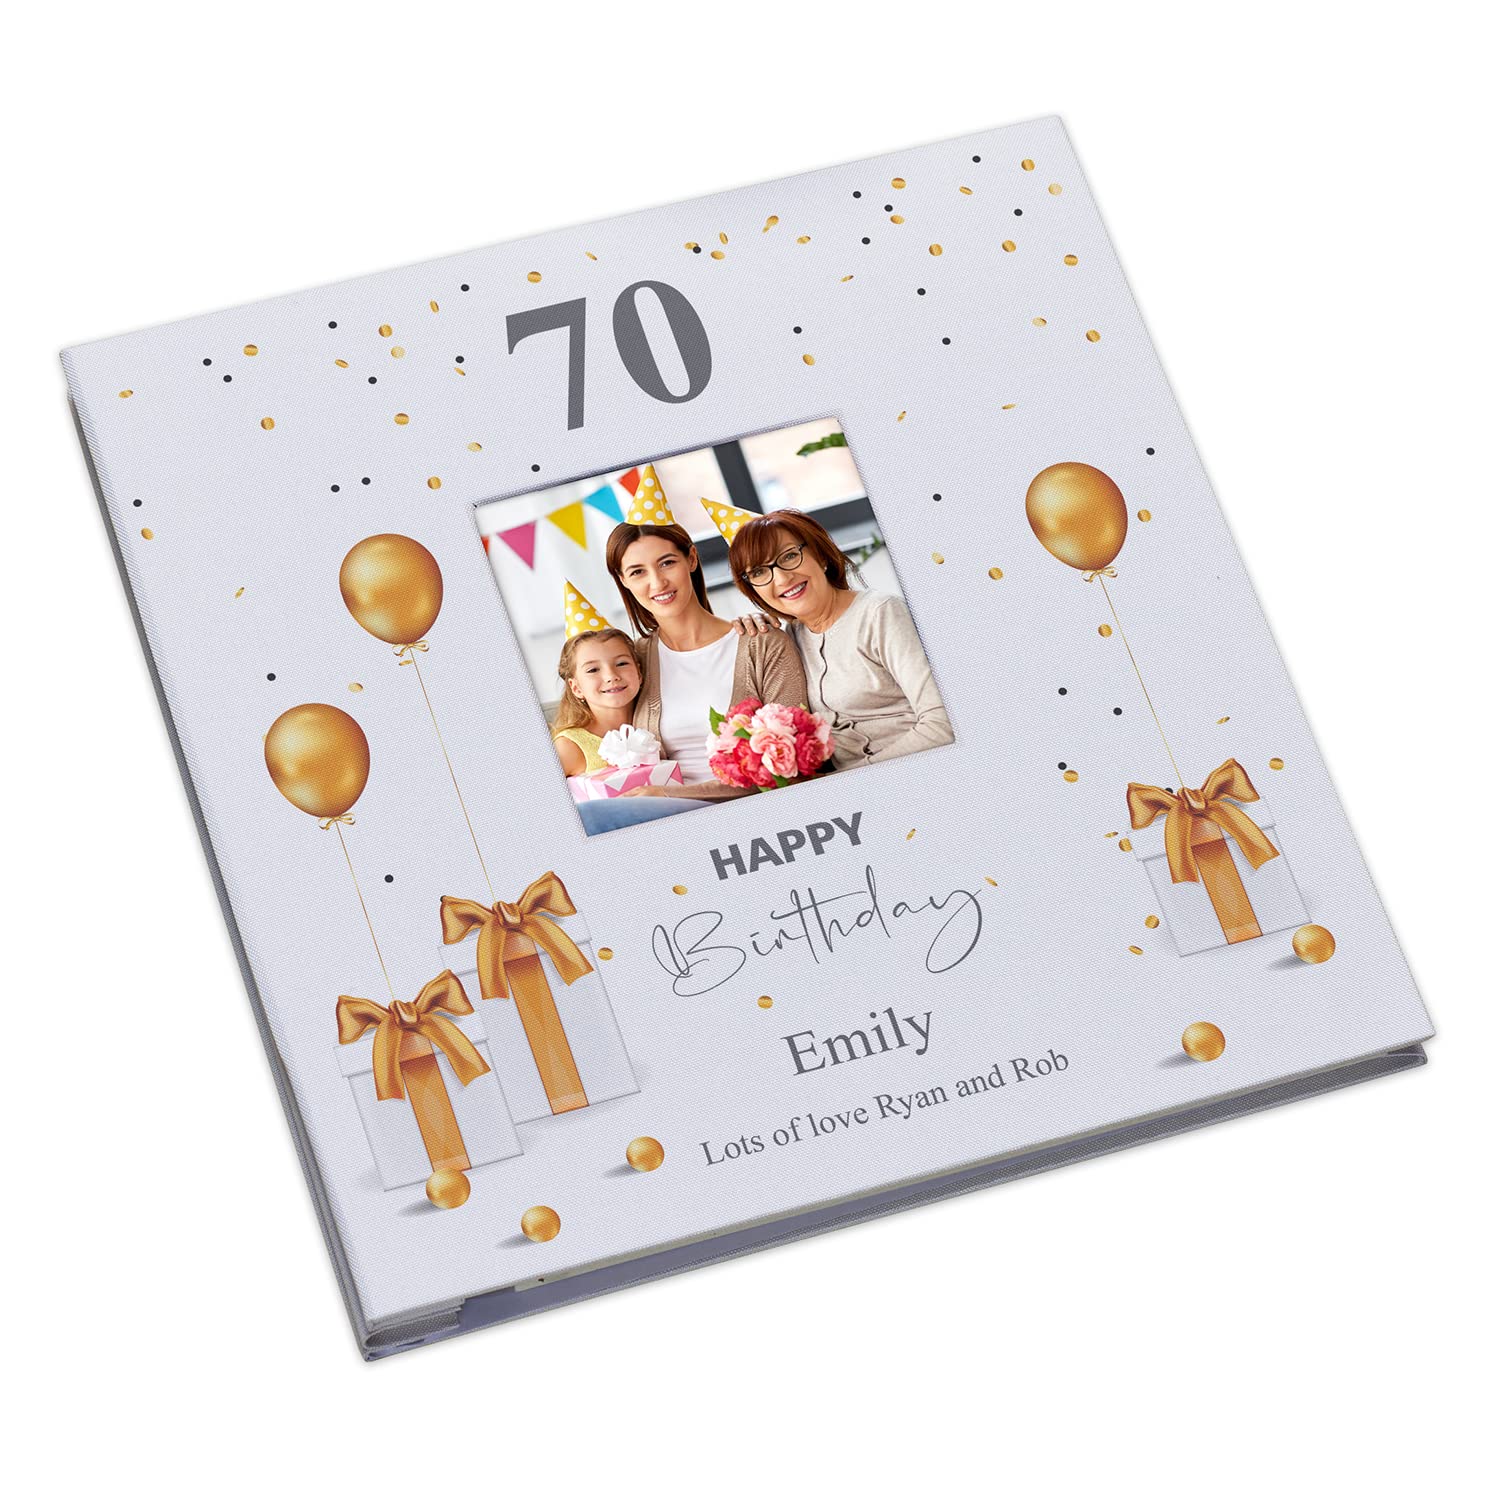 Personalised 70th Birthday Photo Album Linen Cover With Gold Balloons